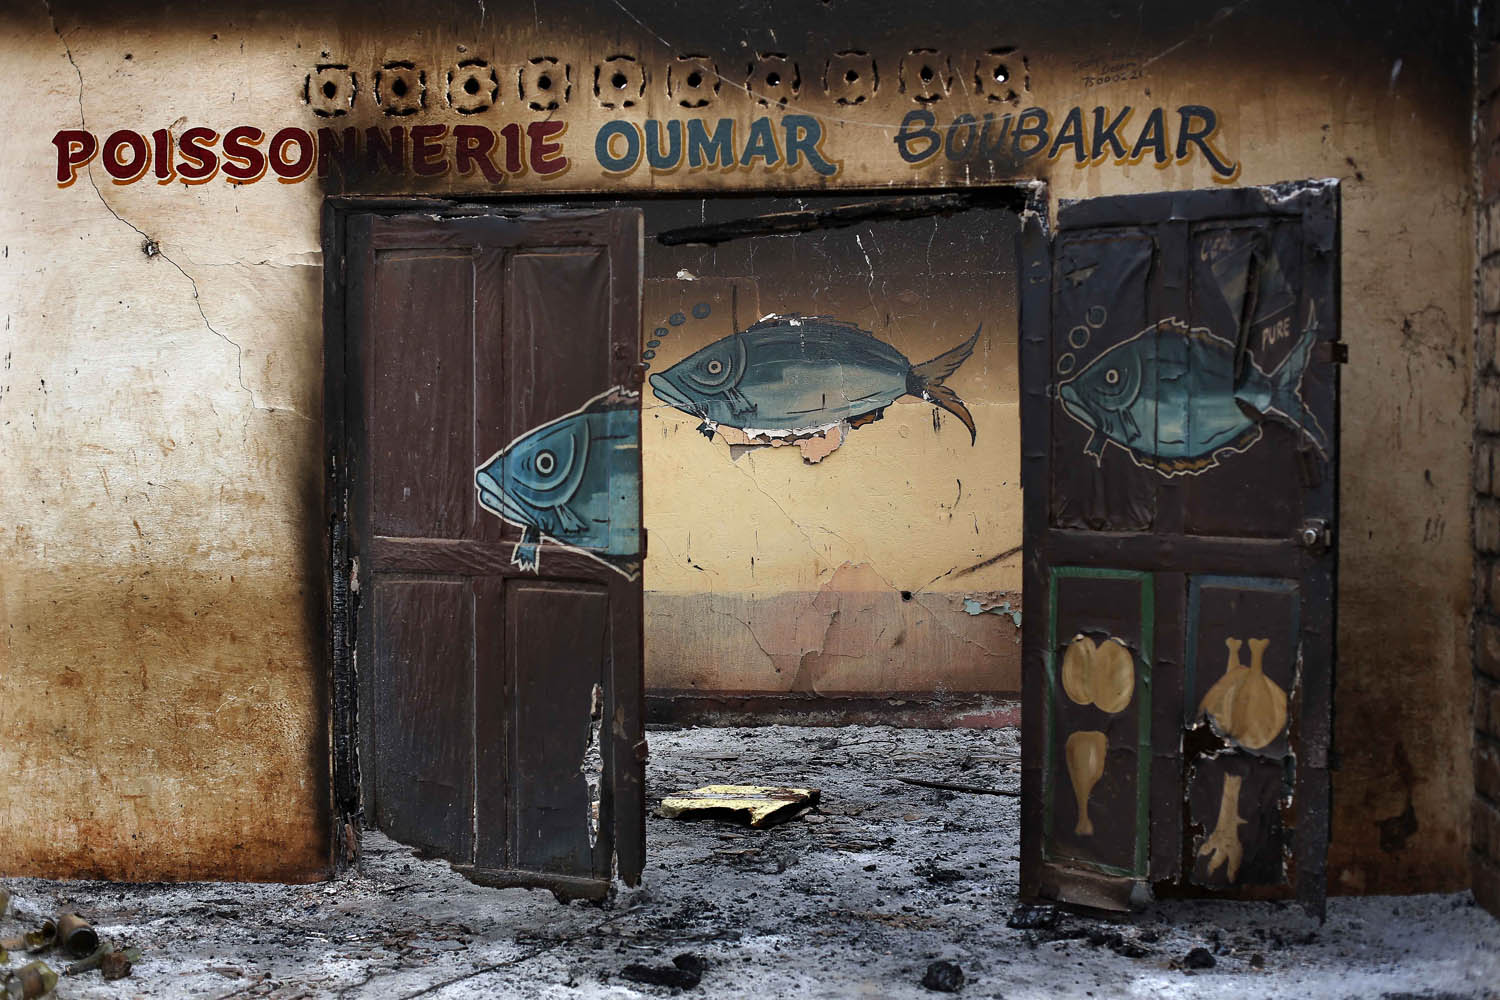 Feb. 4, 2014. A Muslim owned fish shop stands looted in the Miskin district of Bangui, Central African Republic.